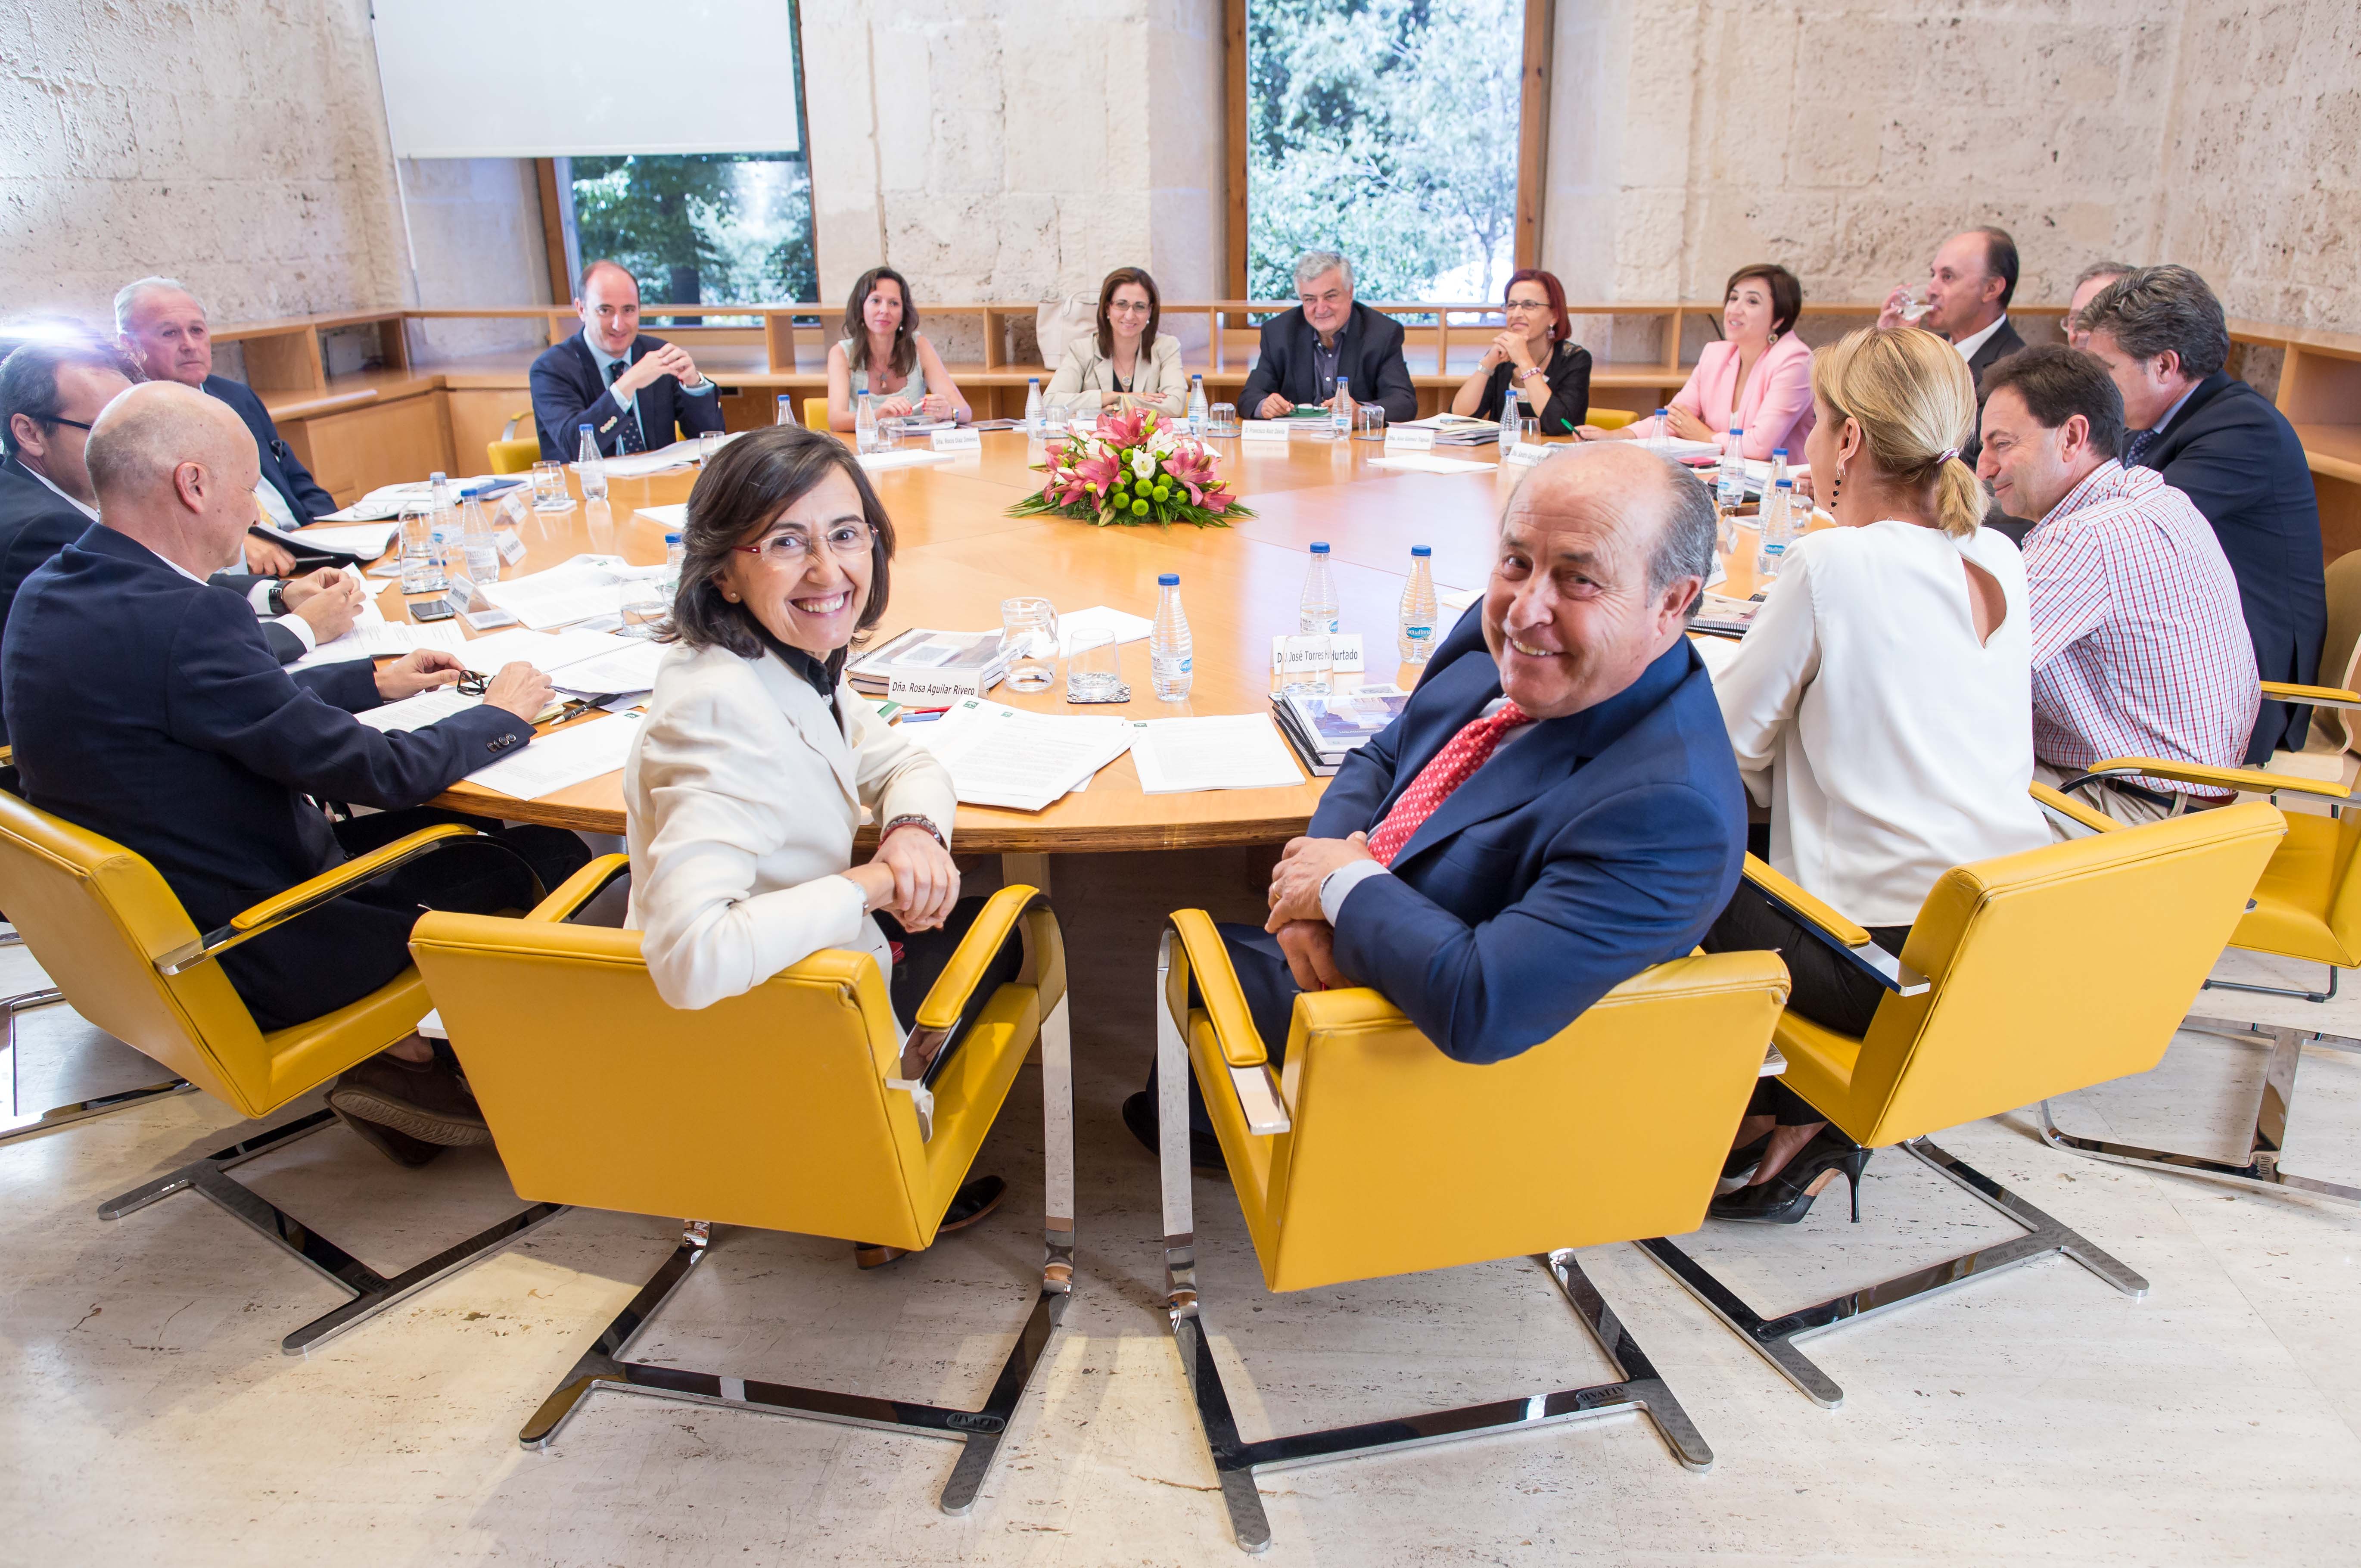 The regional minister of culture chairs the assembly of the council of the alhambra and generalife